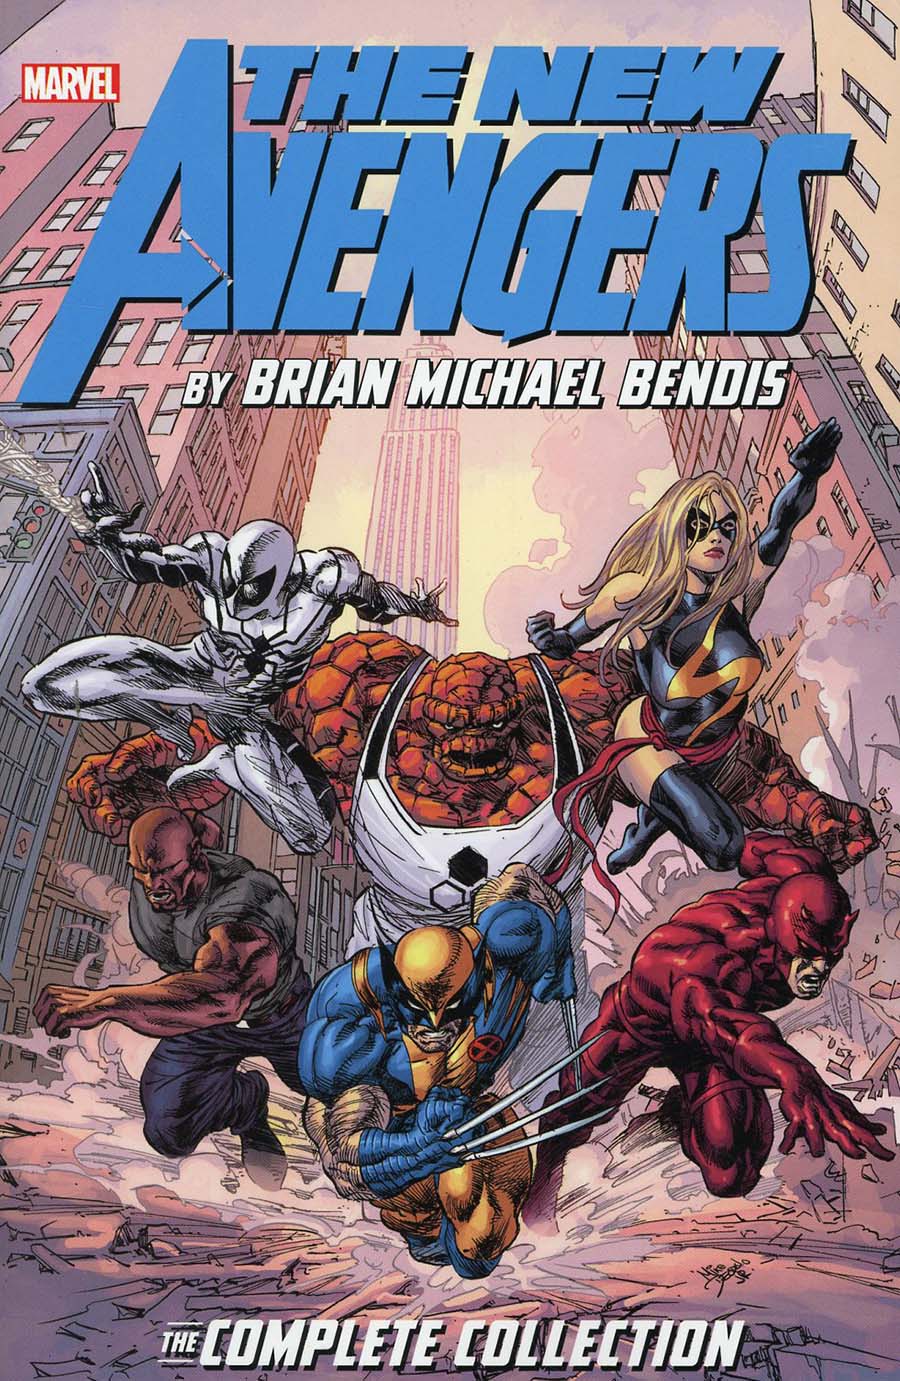 New Avengers By Brian Michael Bendis Complete Collection Vol 7 TP